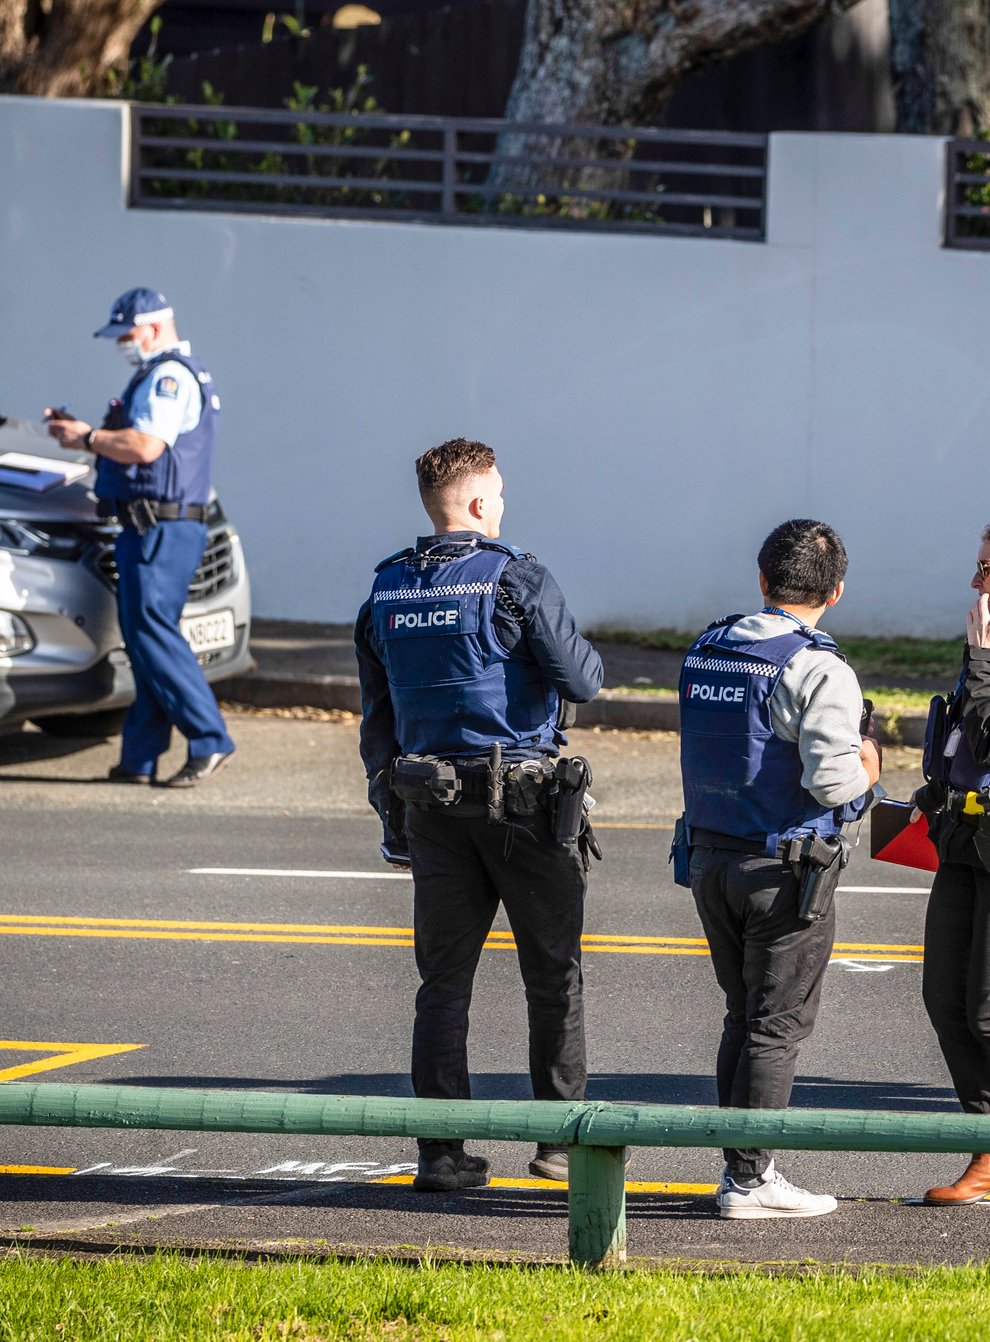 Police set up cordons and search area around a suburb of Auckland following reports of multiple stabbings in New Zealand (Michael Craig/New Zealand Herald/AP)